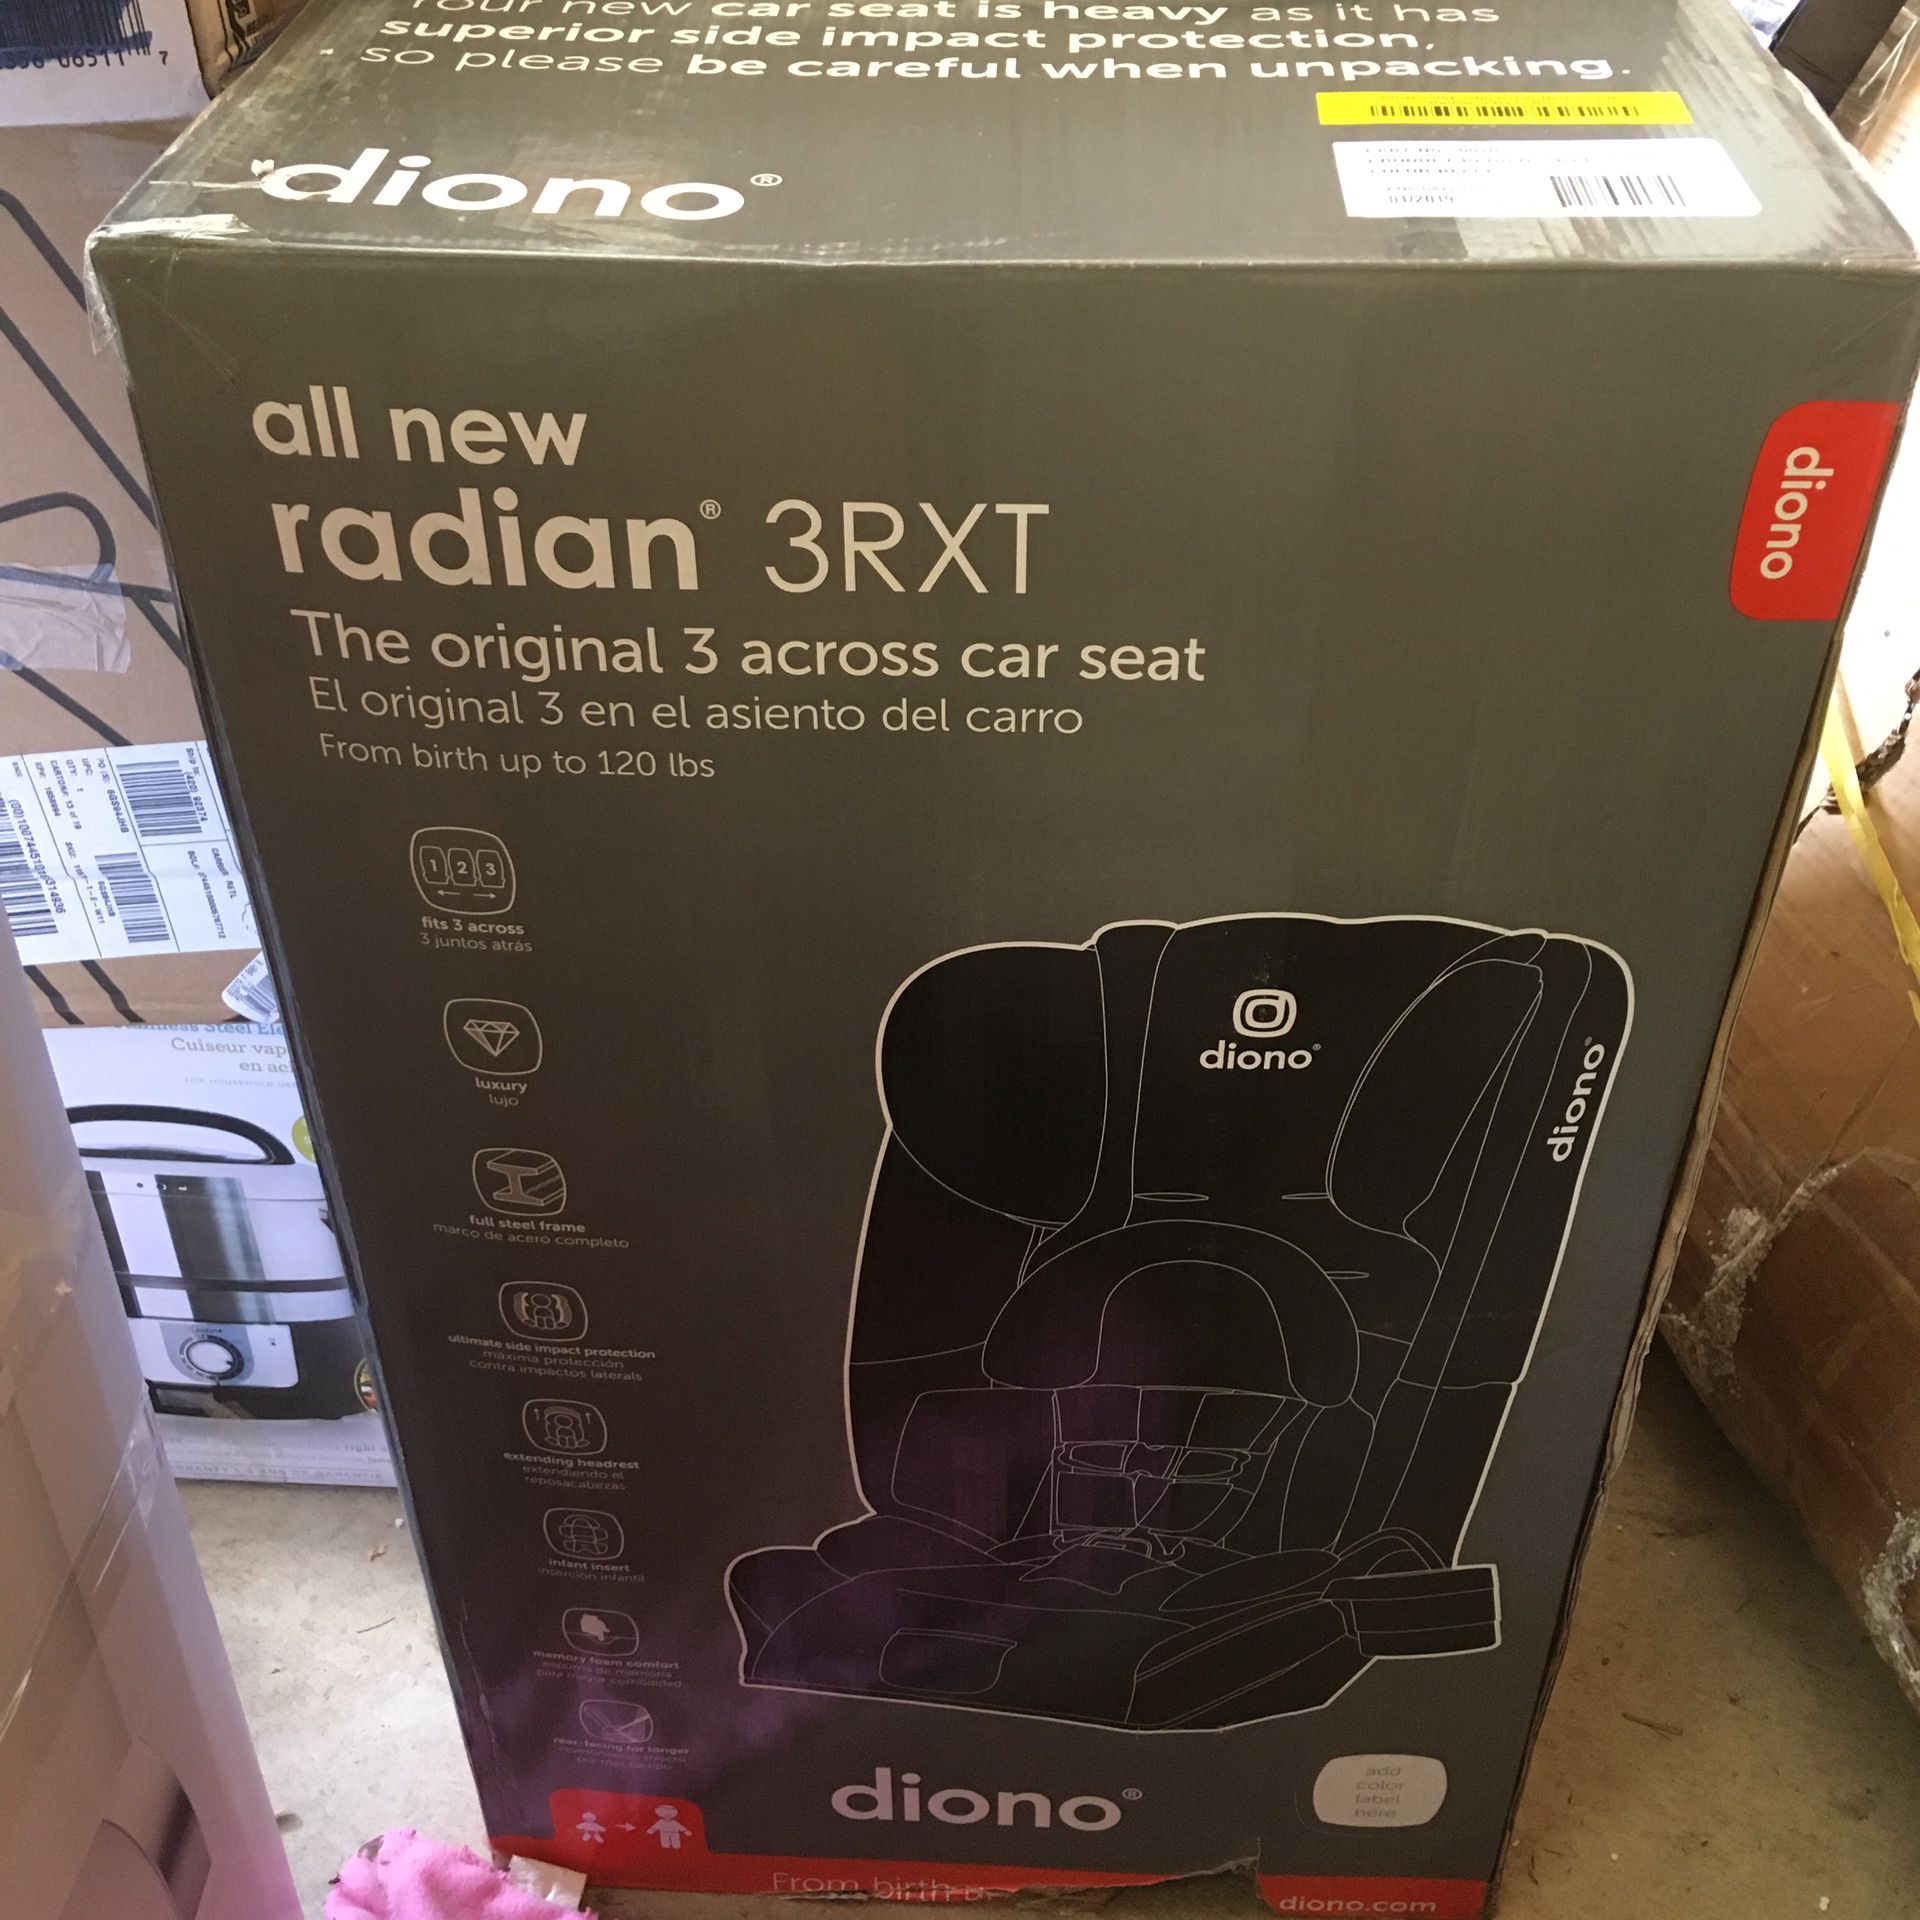 Diono radian is 3rxt Car seat new